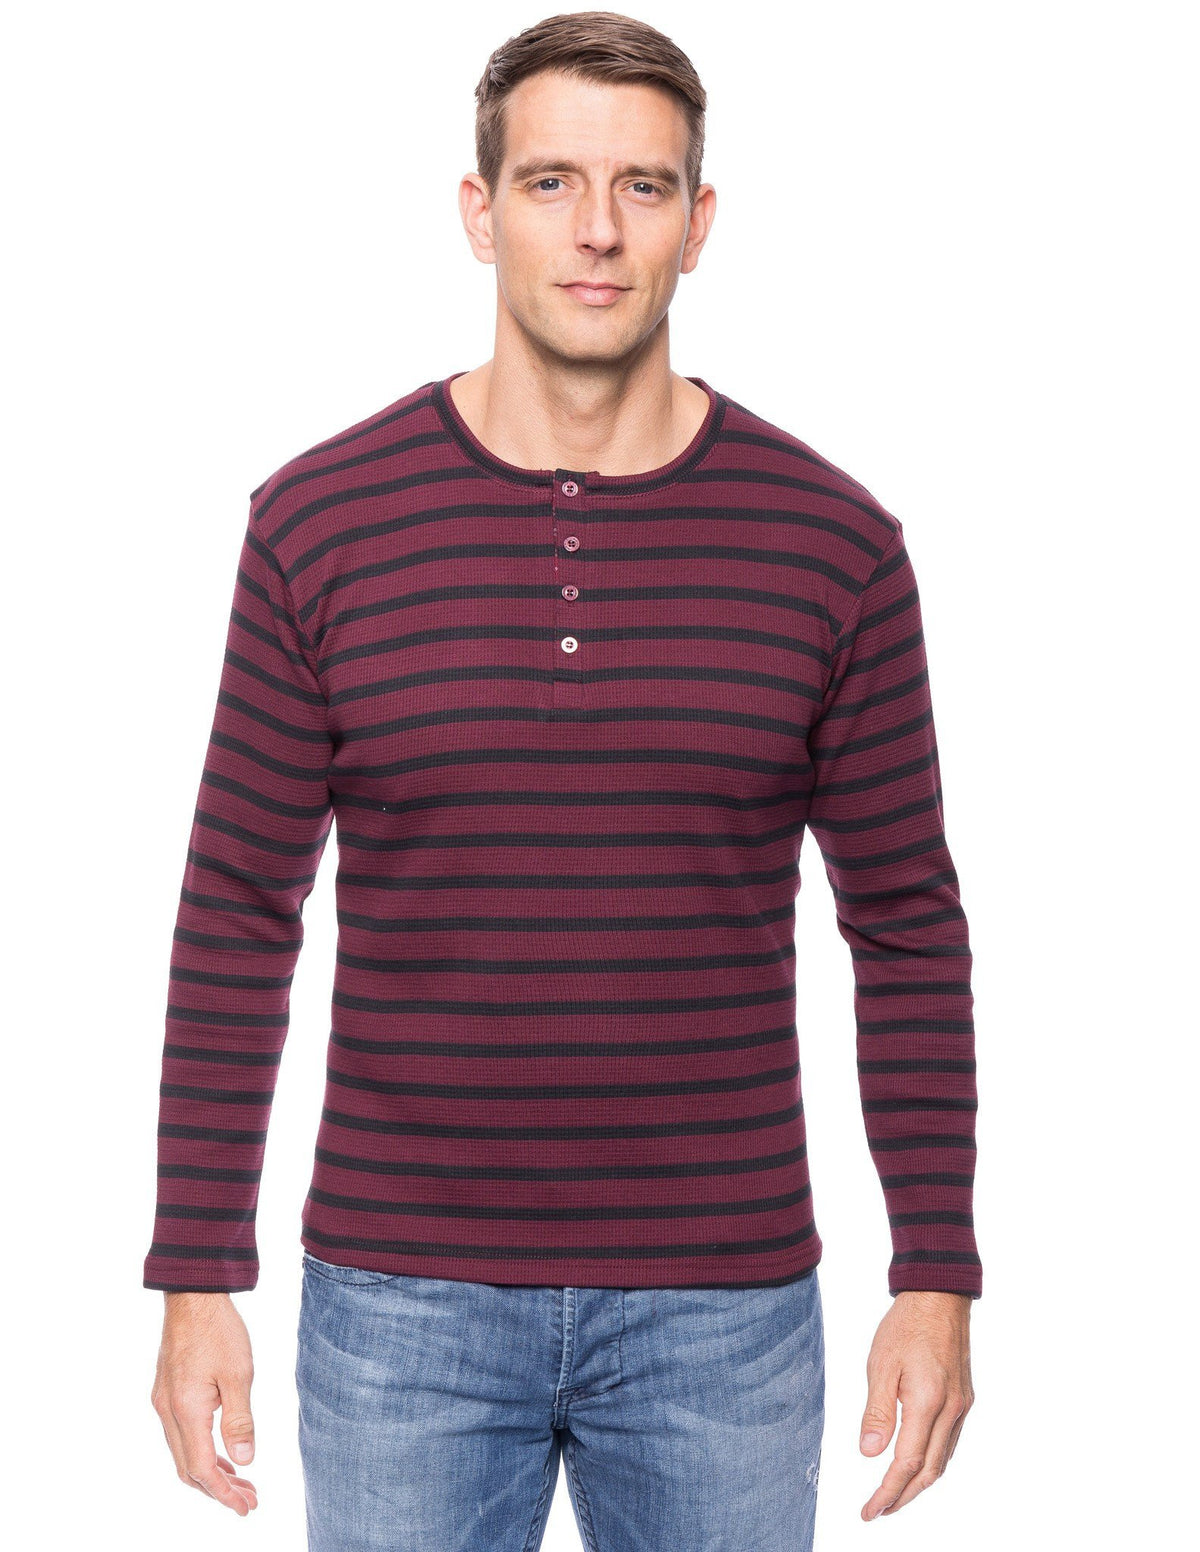 Men's Solid Thermal Henley Long Sleeve T-shirts - Stripes Fig/Black